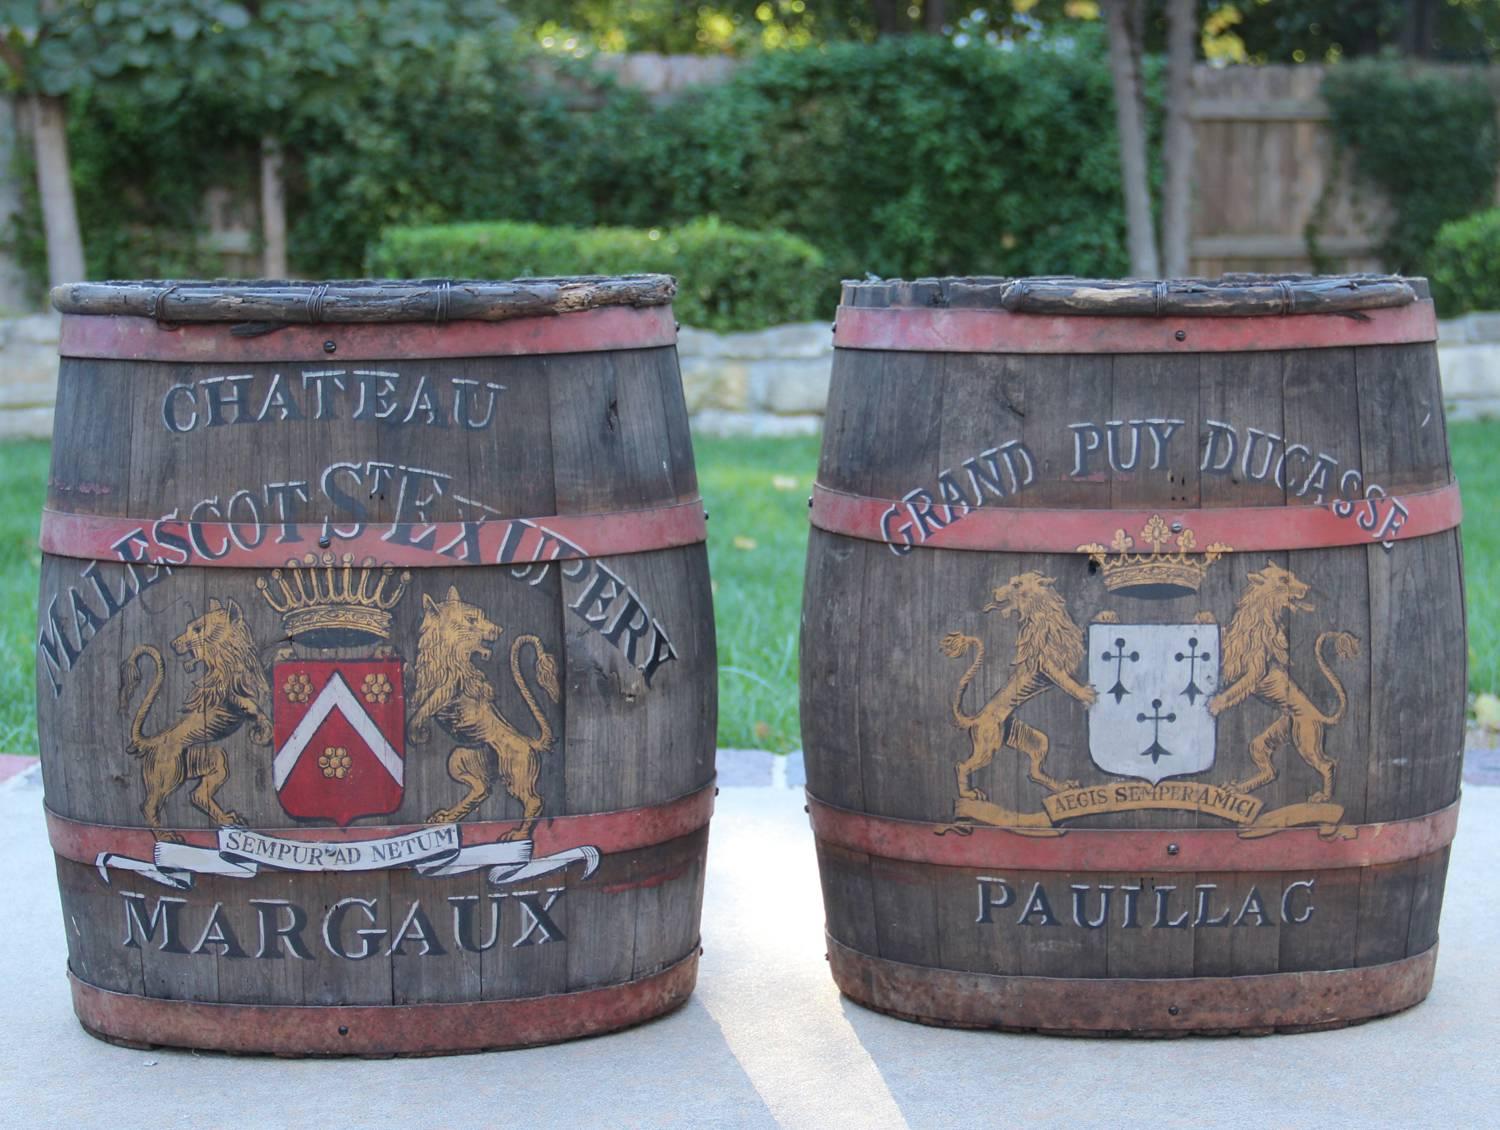 Sold separately.

Late 19th century French grape hods with metal straps and handle. These beautiful French grape hods were once used to pick grapes. The hod on the left features the famous Château Malescot St. Exupéry vineyard cote of arms from the